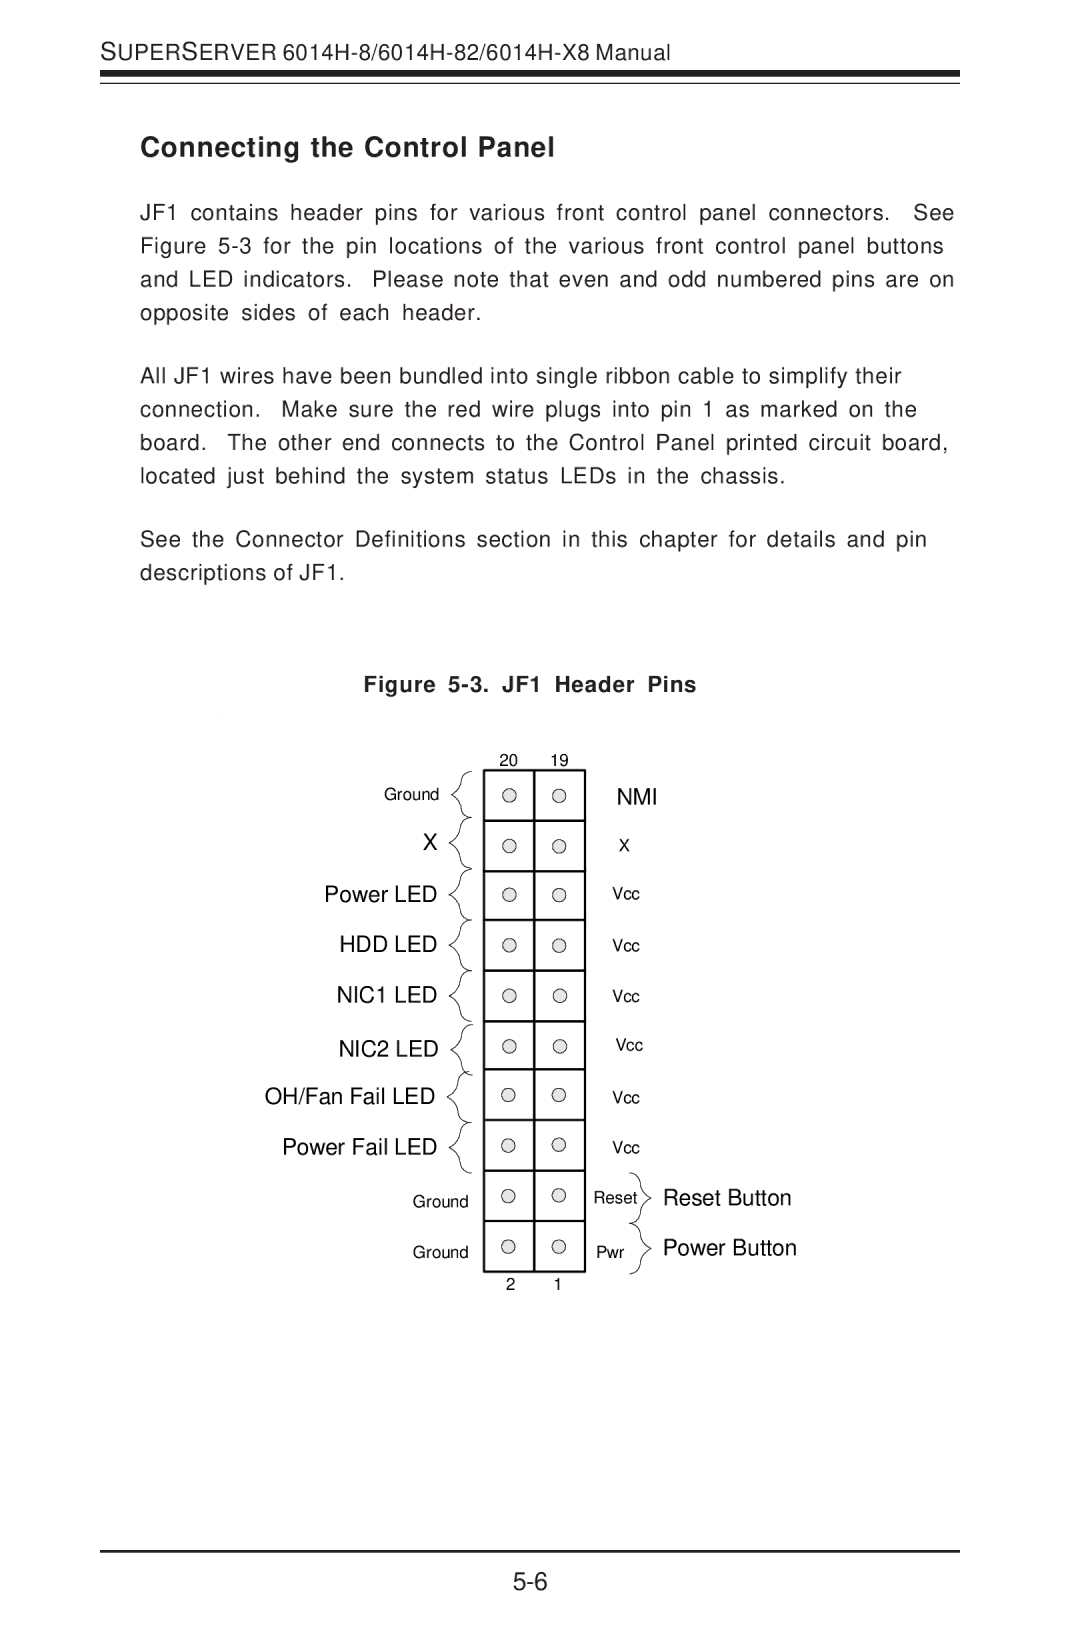 SUPER MICRO Computer 6014H-8 user manual Connecting the Control Panel, JF1 Header Pins 